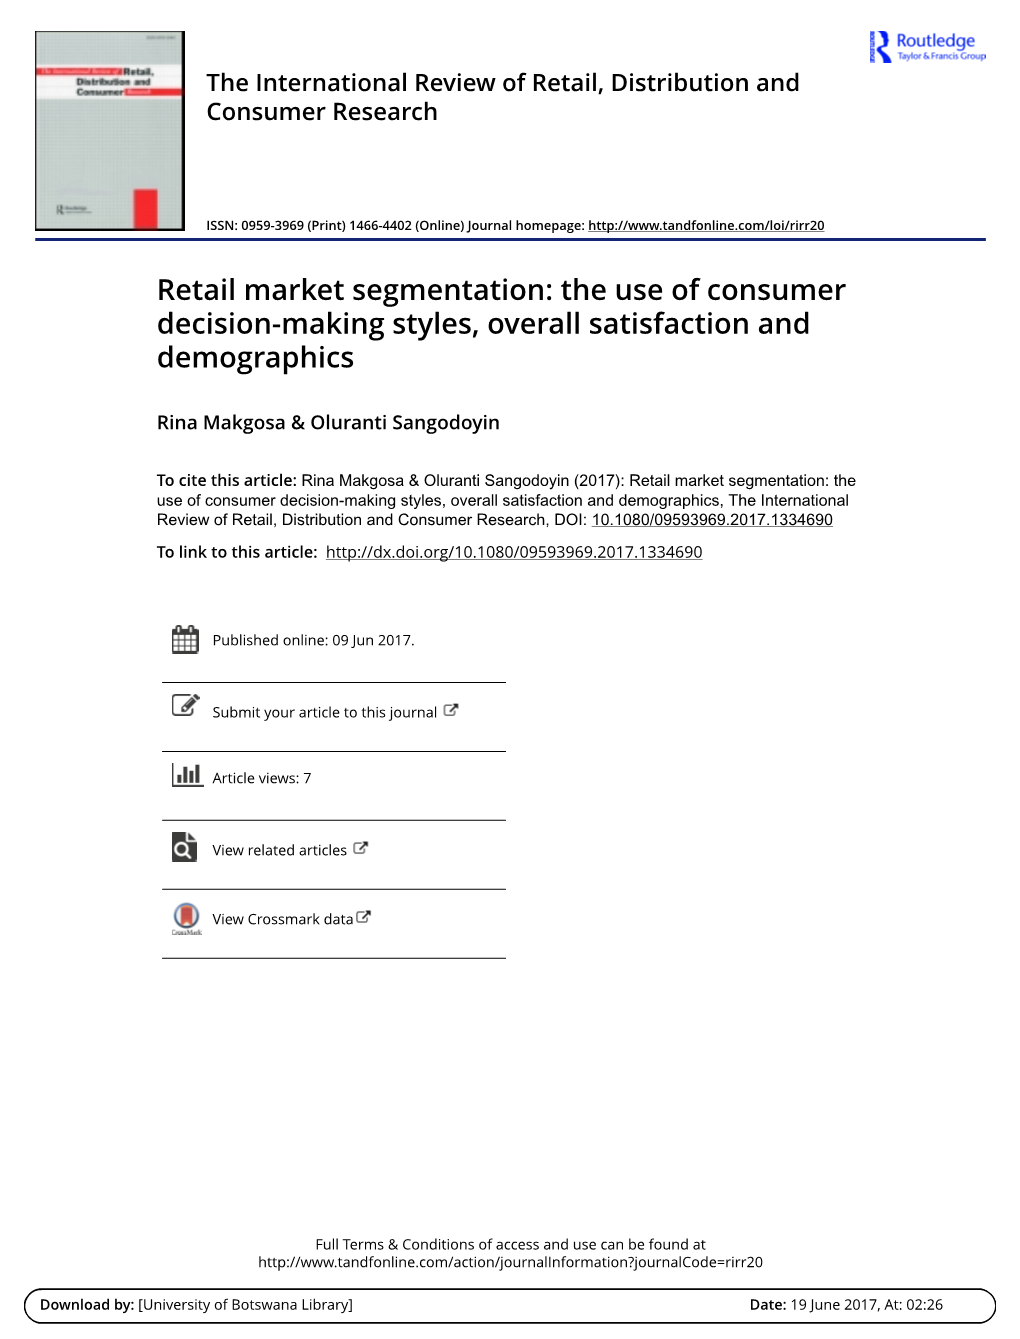 Retail Market Segmentation: the Use of Consumer Decision-Making Styles, Overall Satisfaction and Demographics